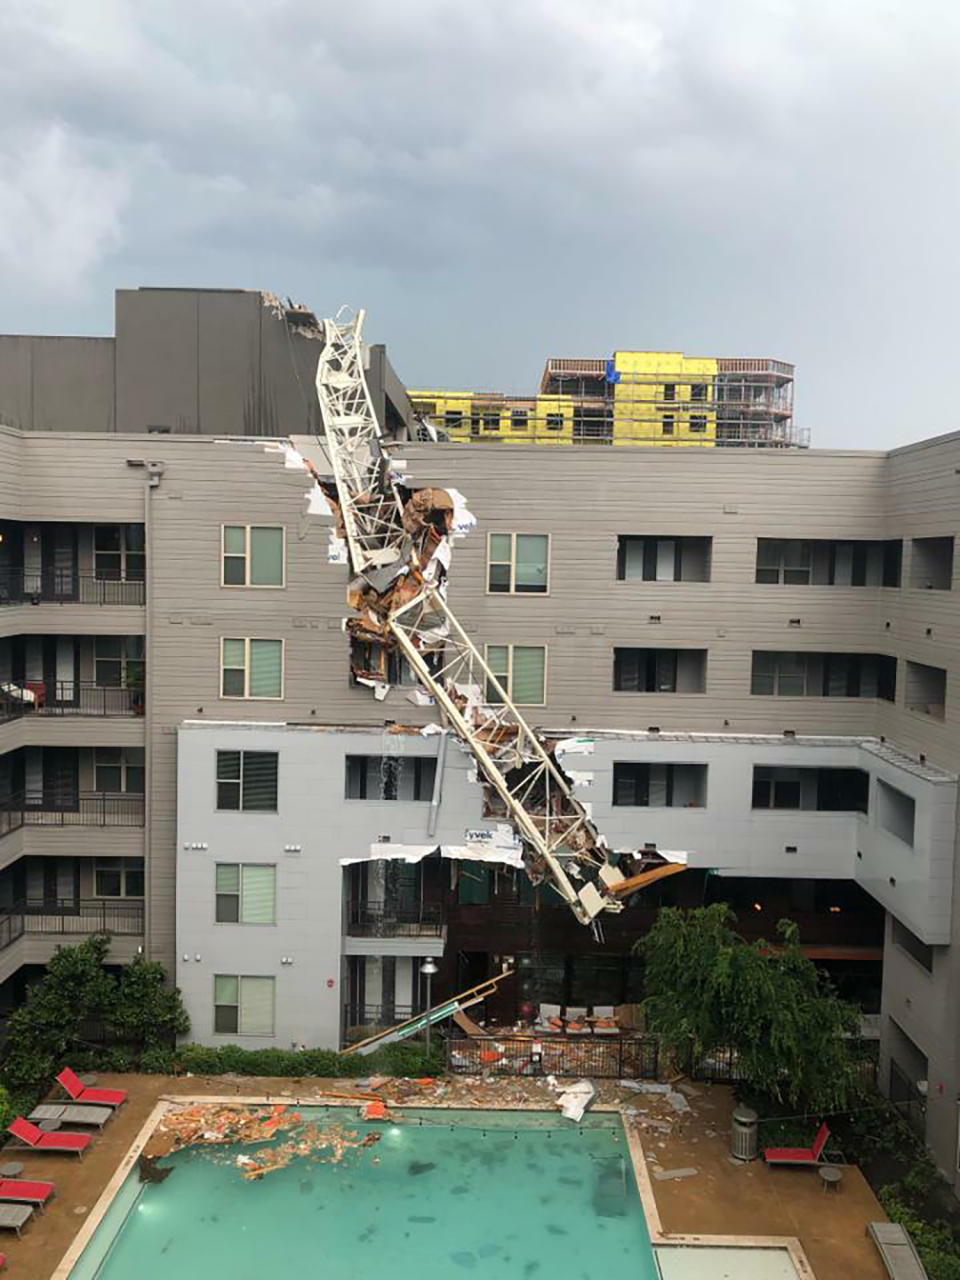 This photo provided by Michael Santana shows the scene after a crane collapsed into Elan City Lights apartments in Dallas amid severe thunderstorms Sunday, June 9, 2019. (Michael Santana via AP)